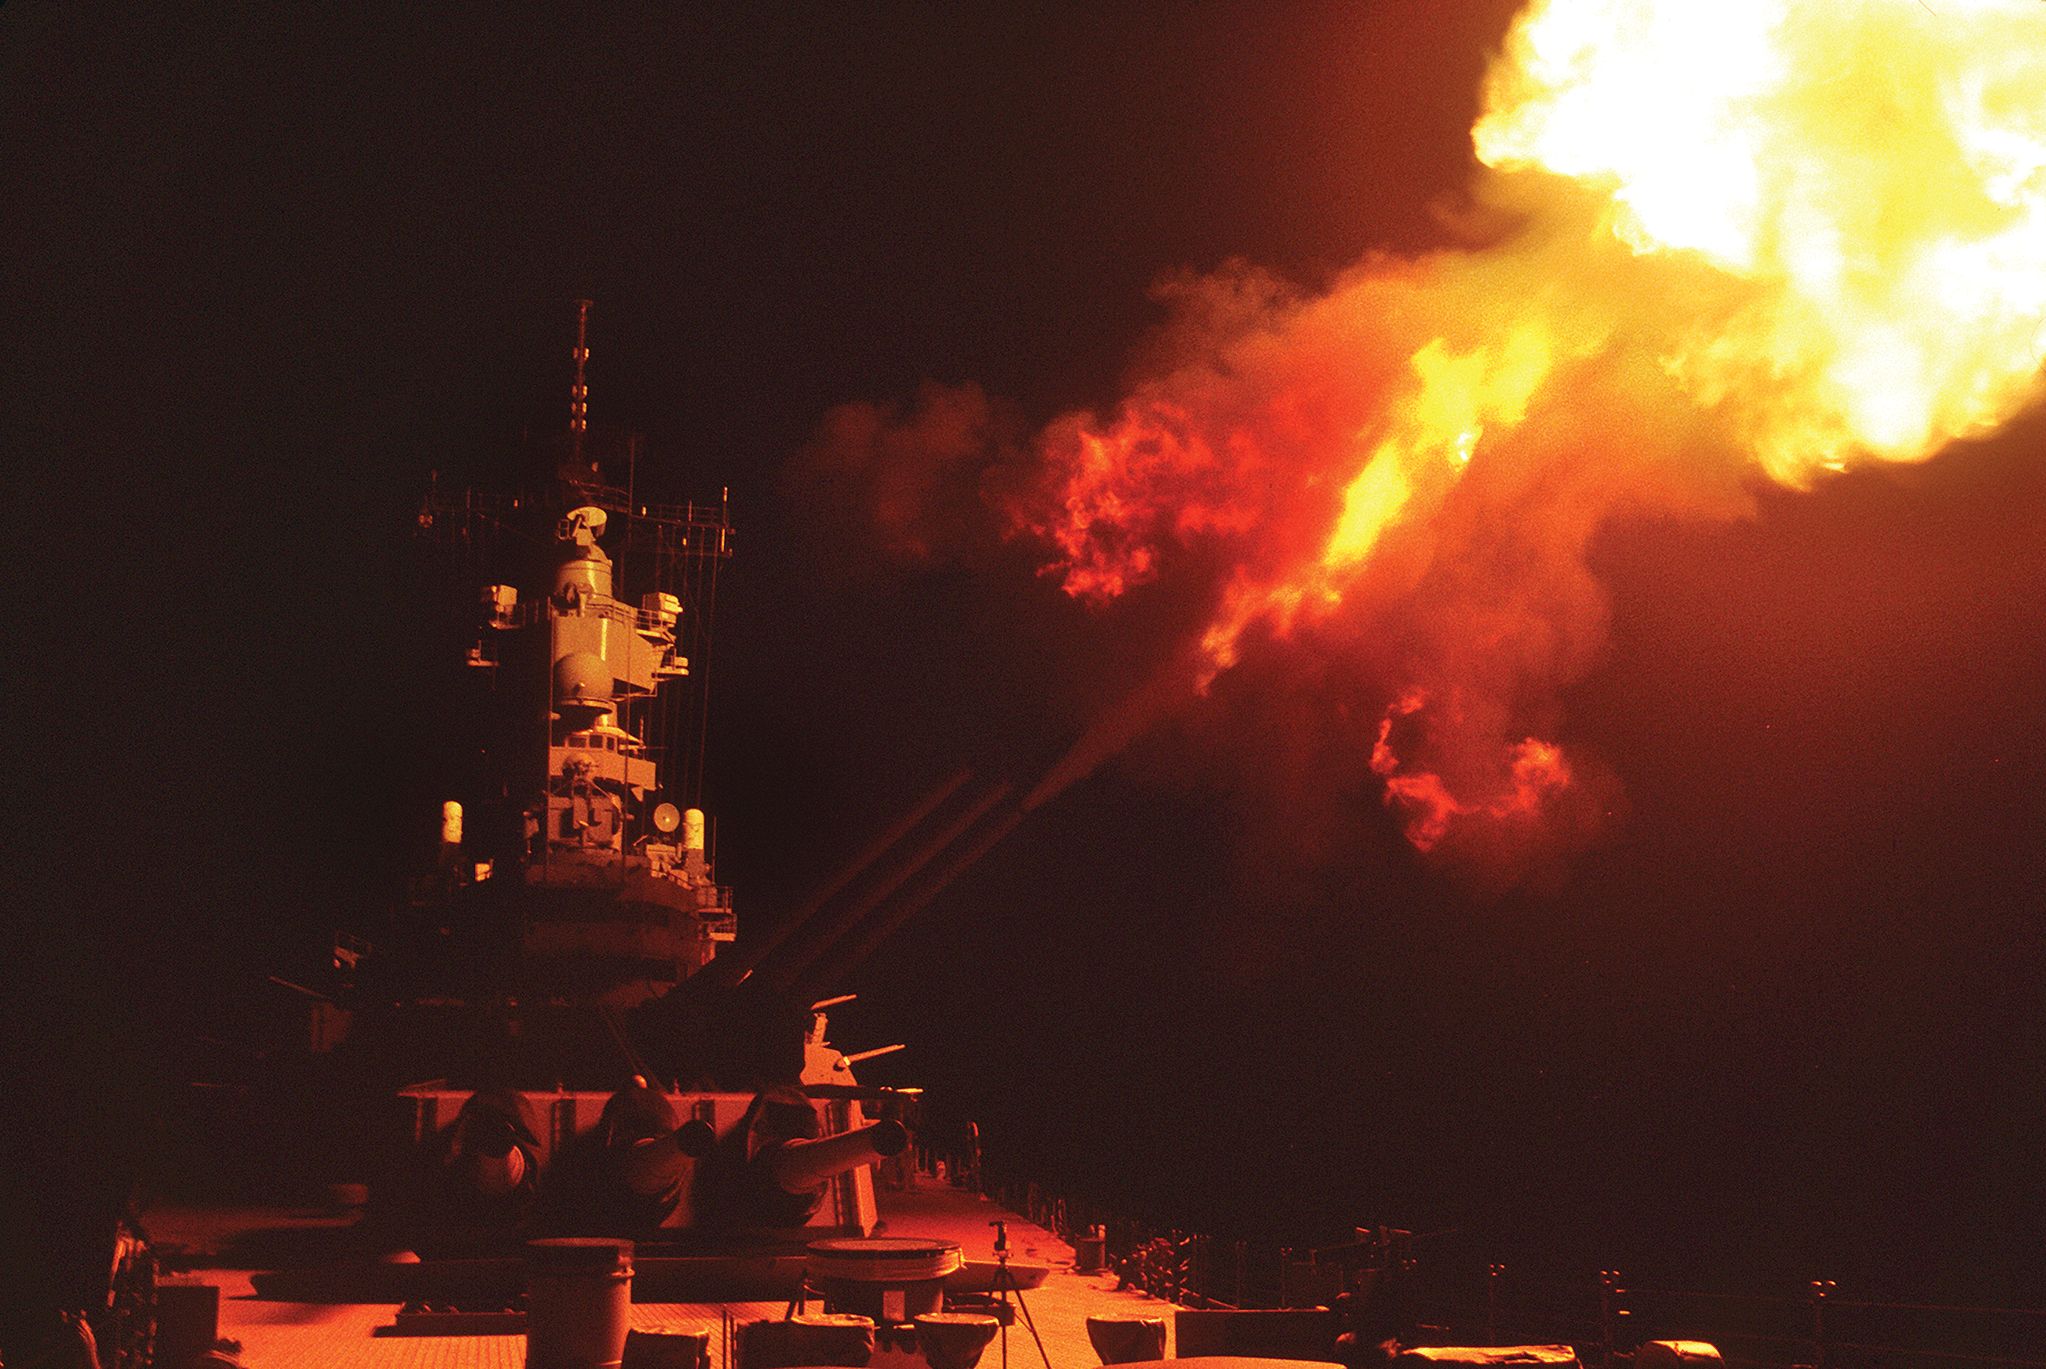 The USS Wisconsin fires her 16-inch guns at Iraqi targets near Khafji. The battleship shelled command posts, artillery batteries, infantry bunkers, and SAM sites in a series of support missions.